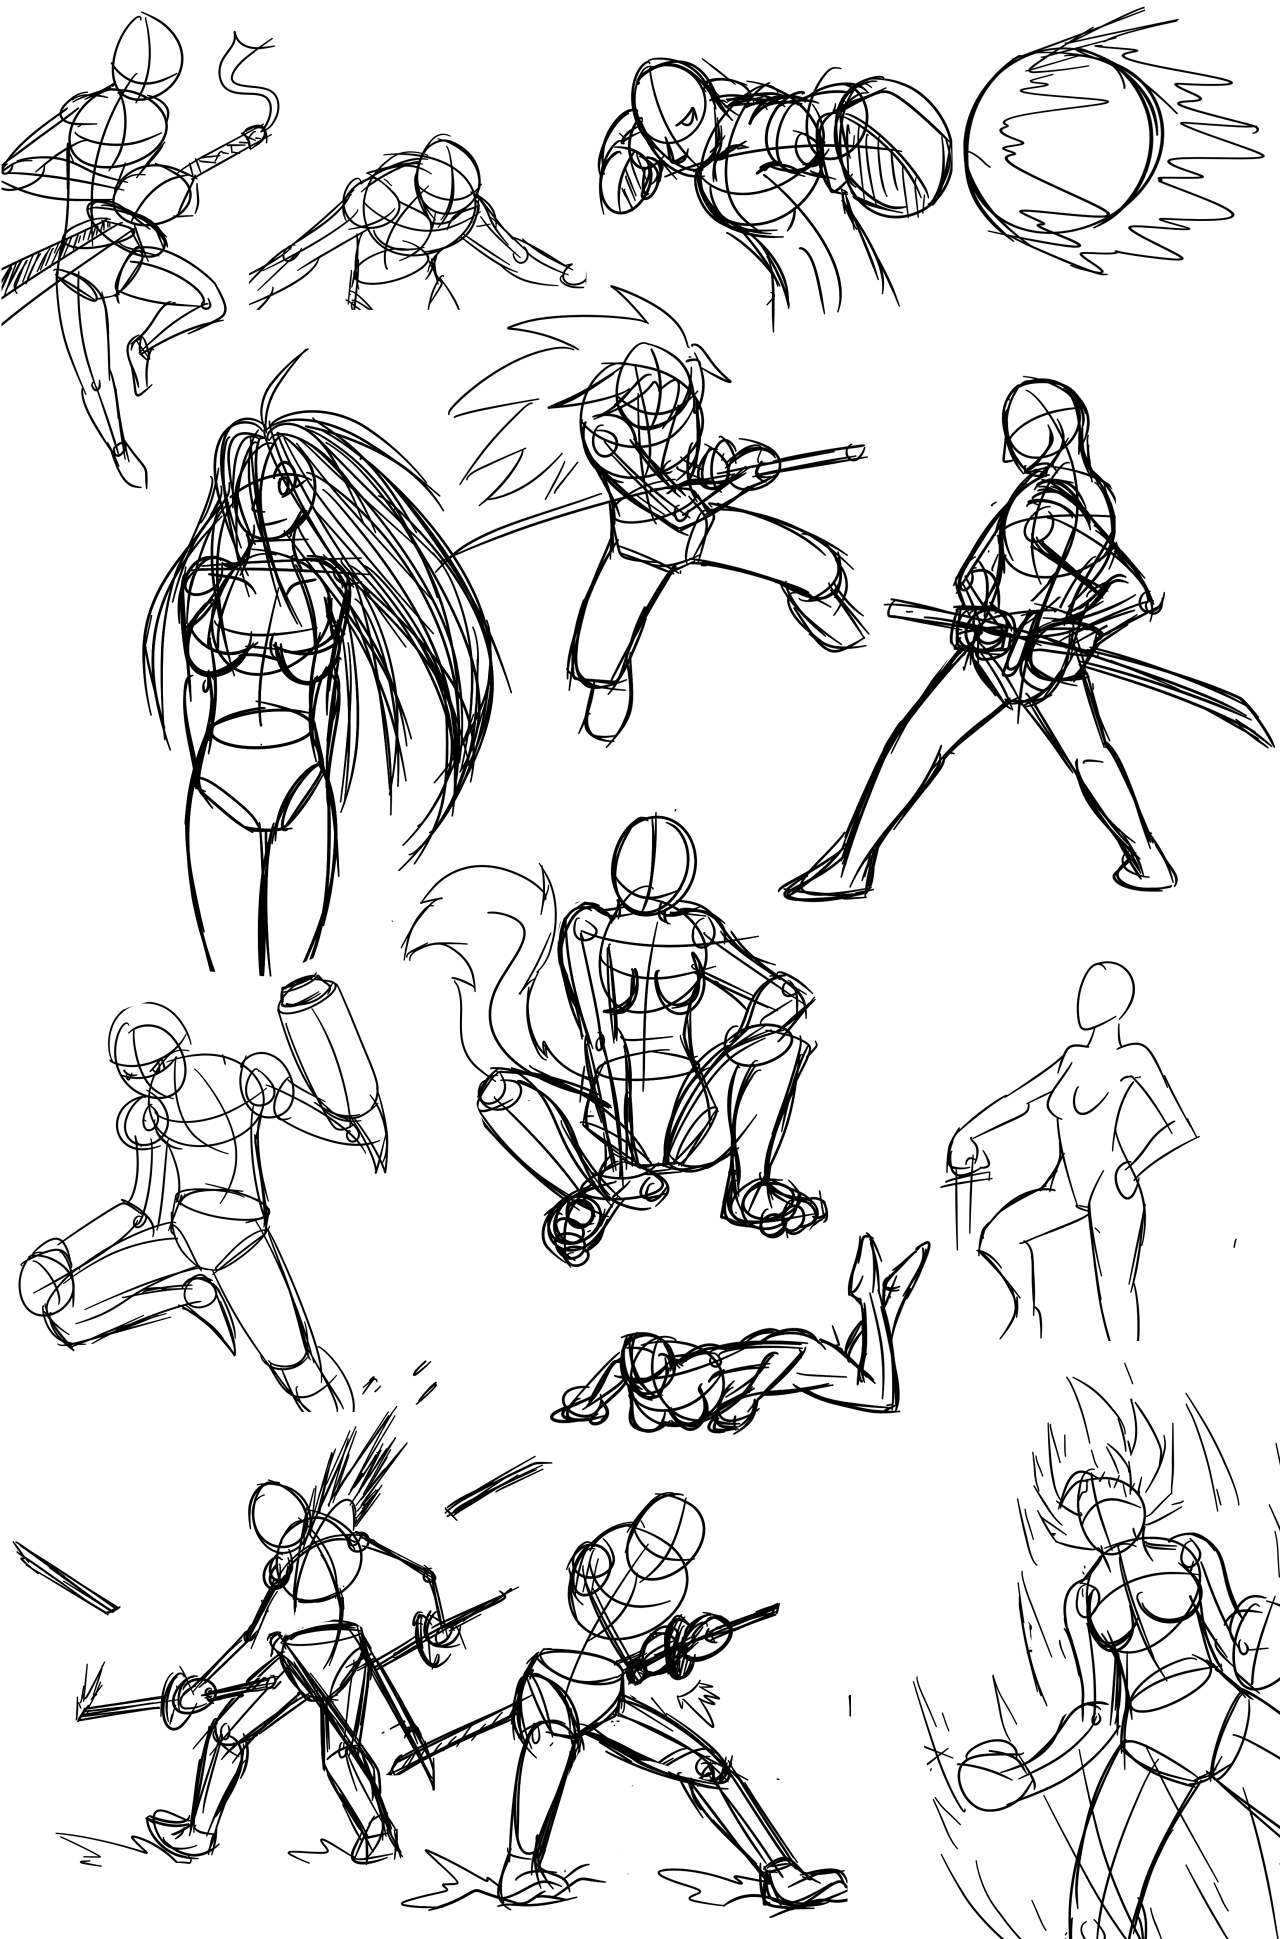 Freelance Illustrator working on anatomy and dynamic poses. Tips critiques?  : r/learnart